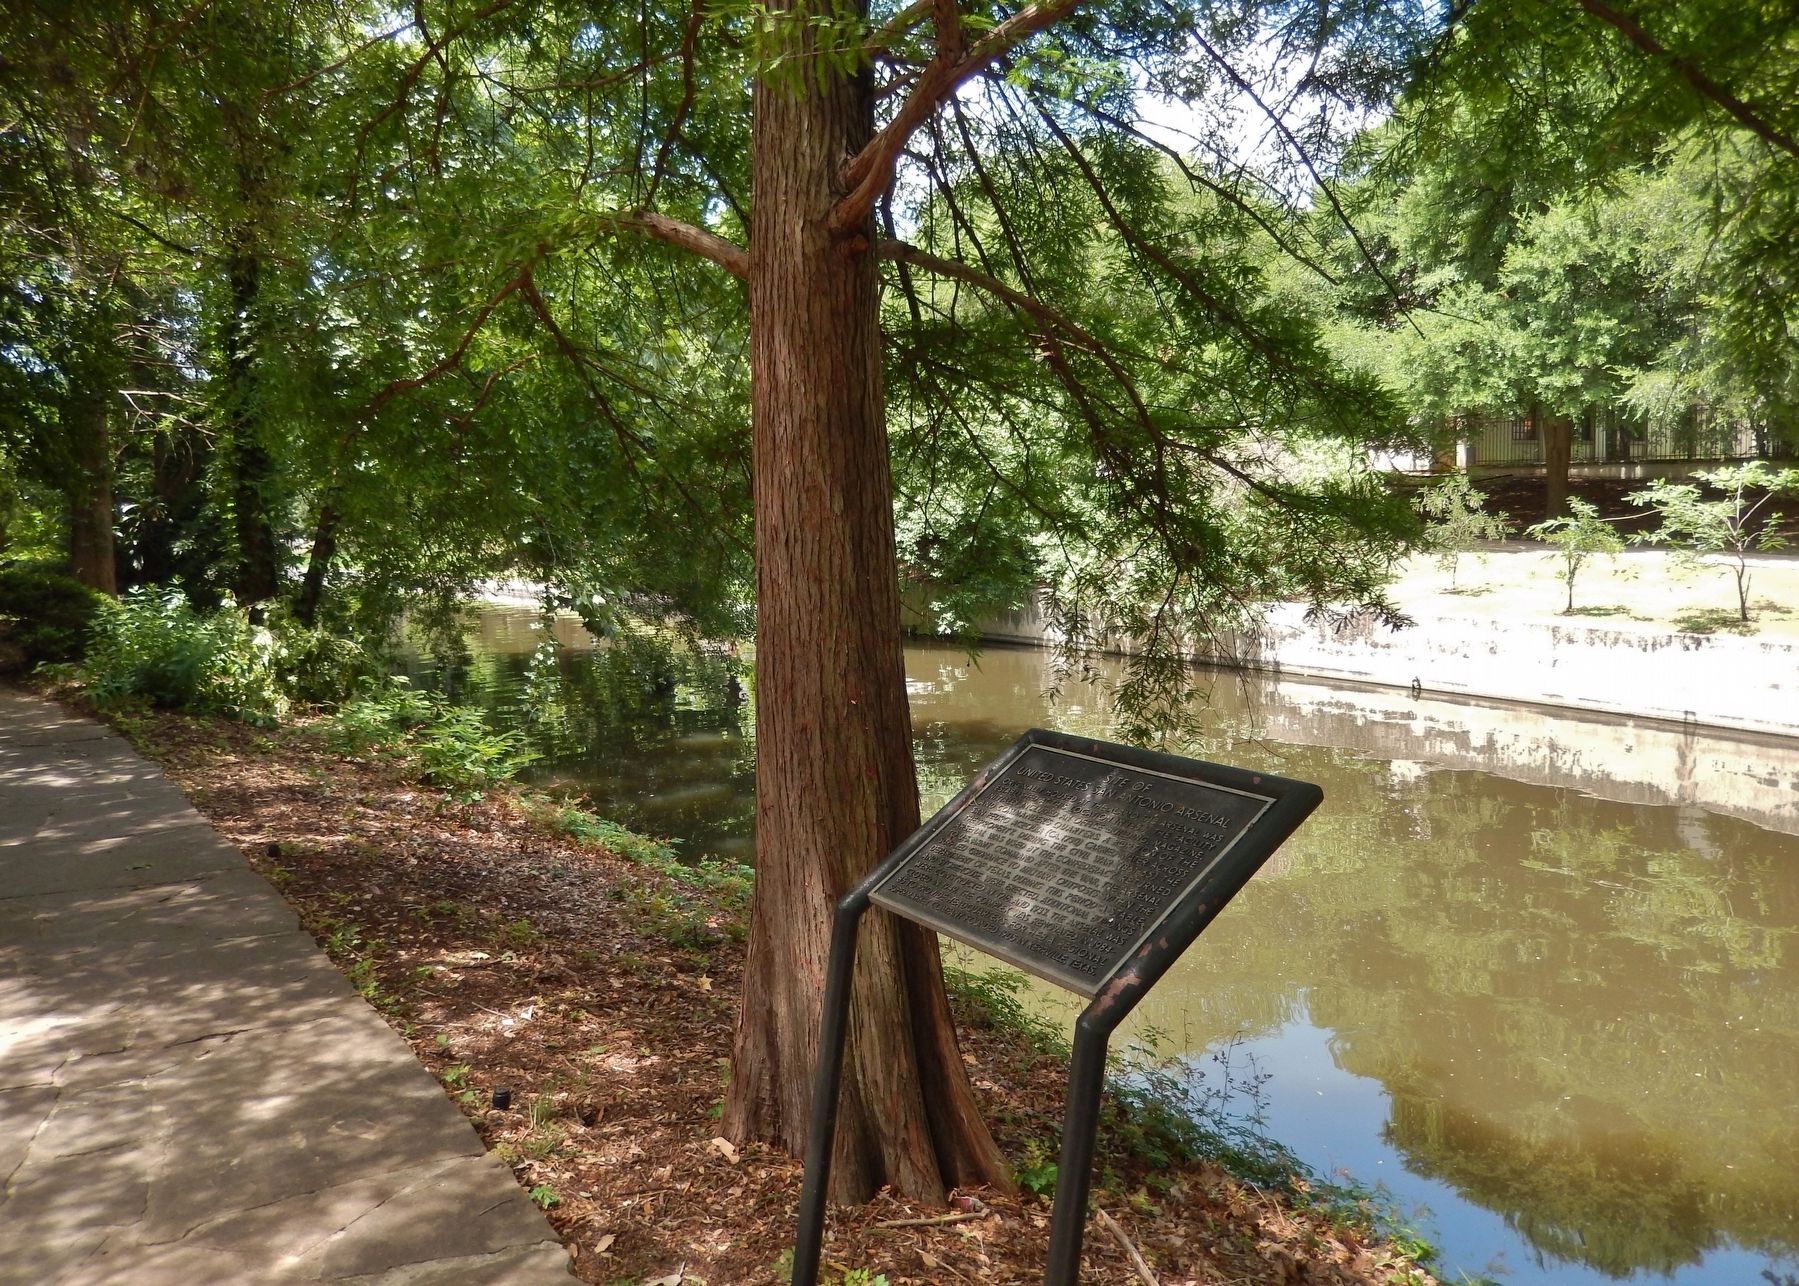 Site of United States San Antonio Arsenal Marker (<i>wide view south along San Antonio River </i>) image. Click for full size.